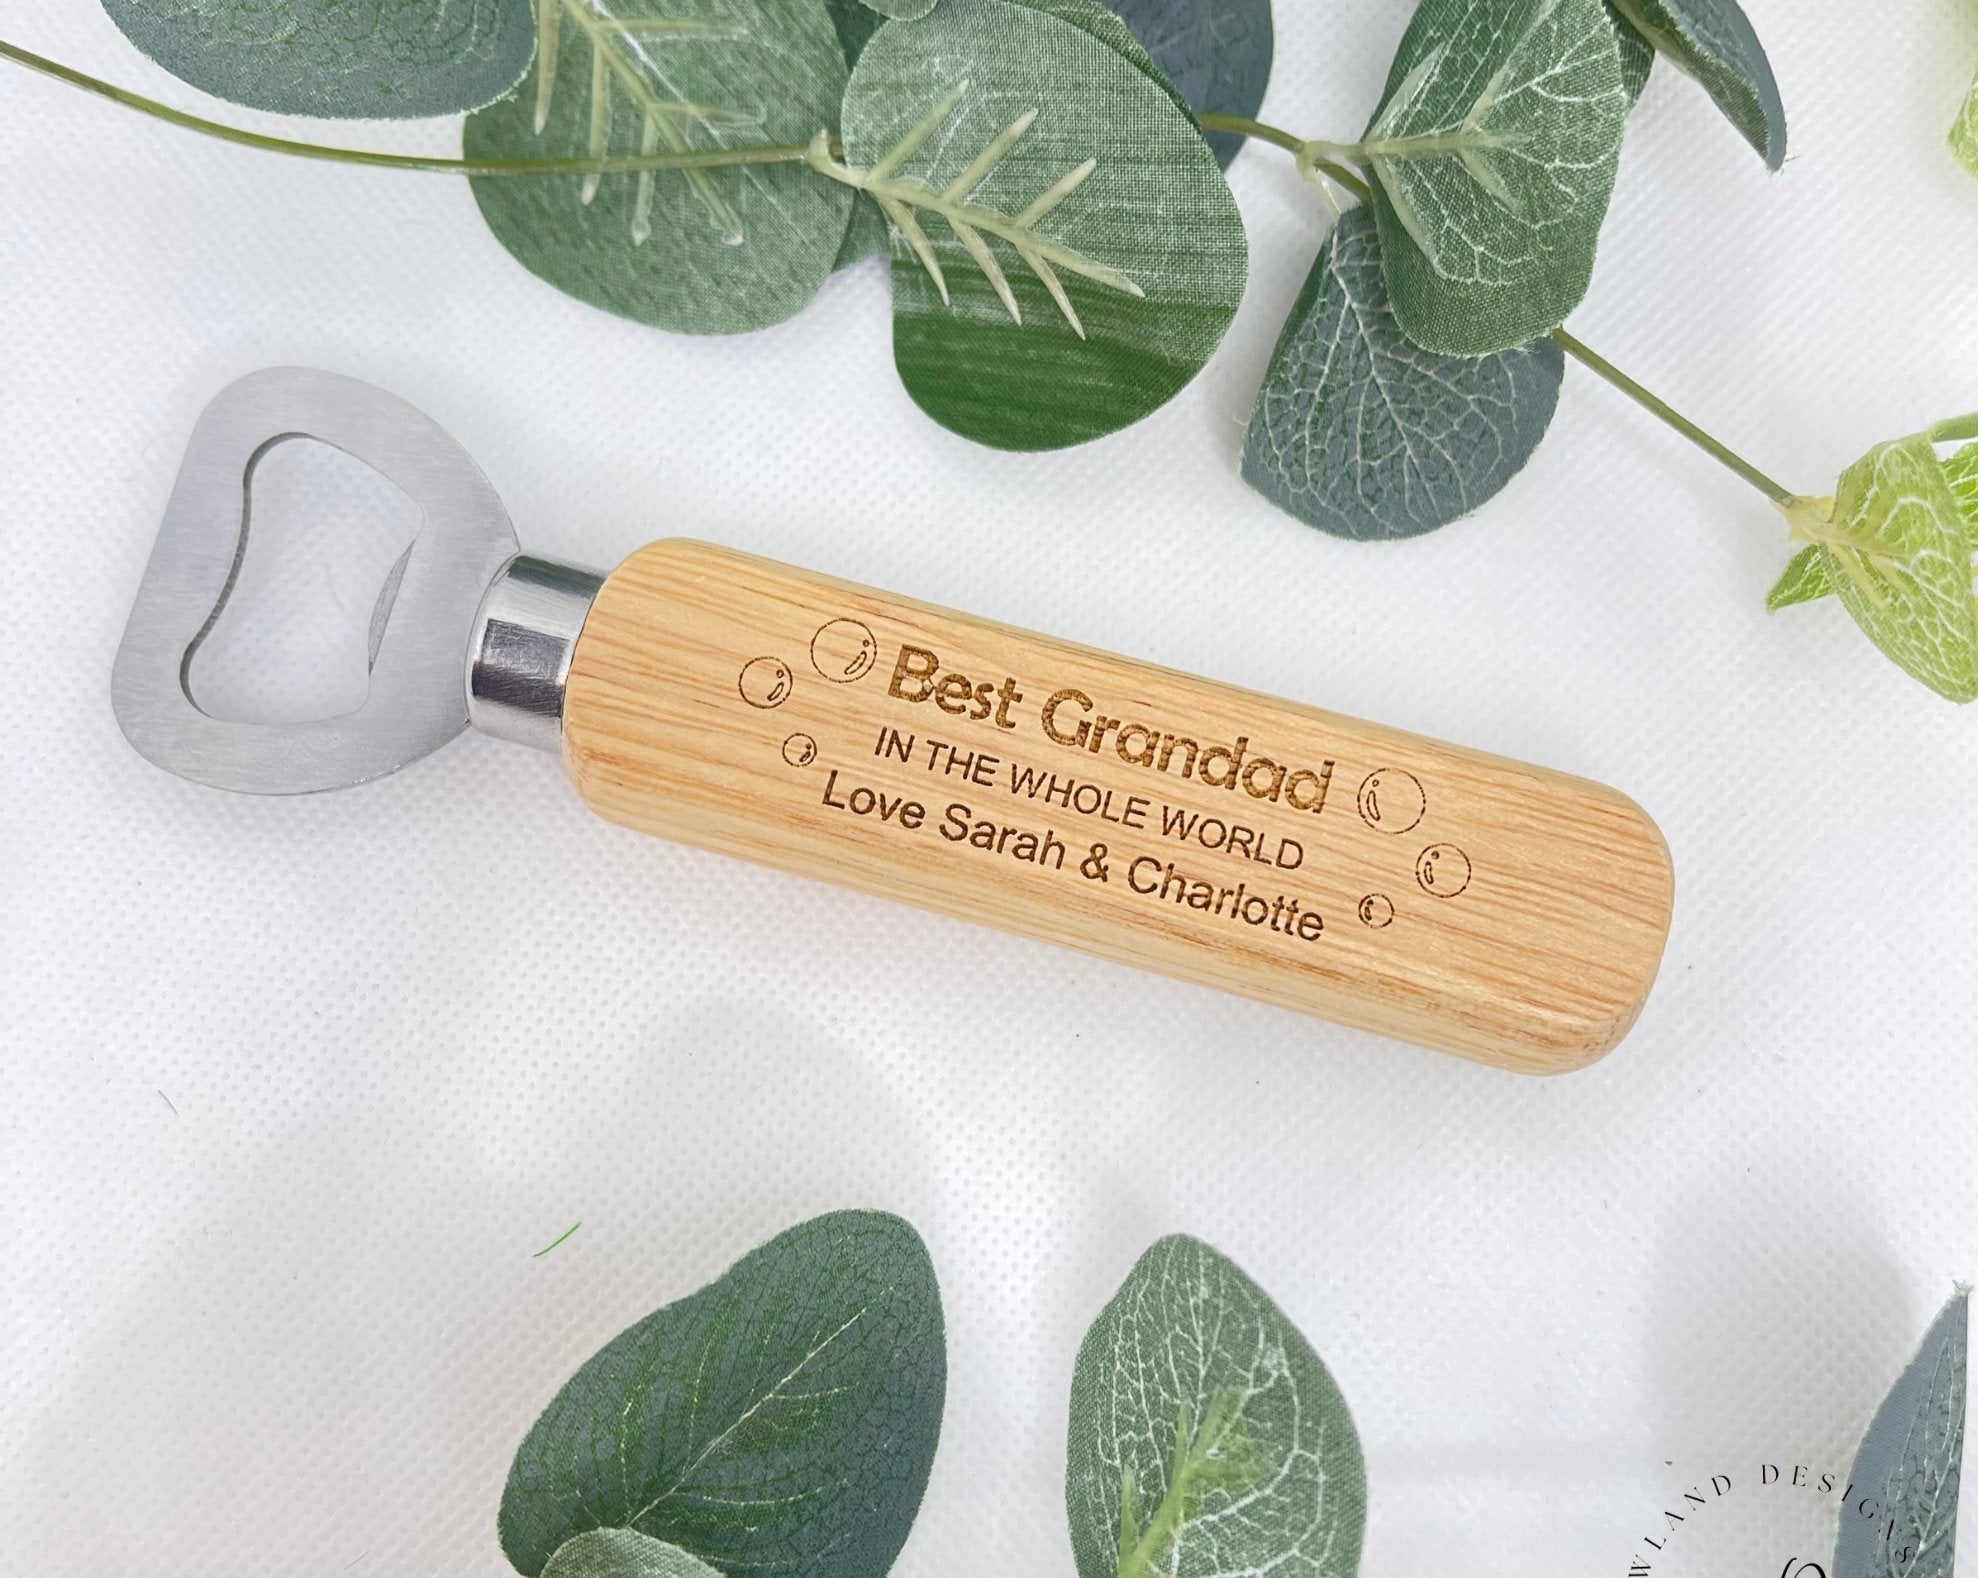 Personalised Wooden Handle Bottle Opener with Stainless Steel Metal Part.